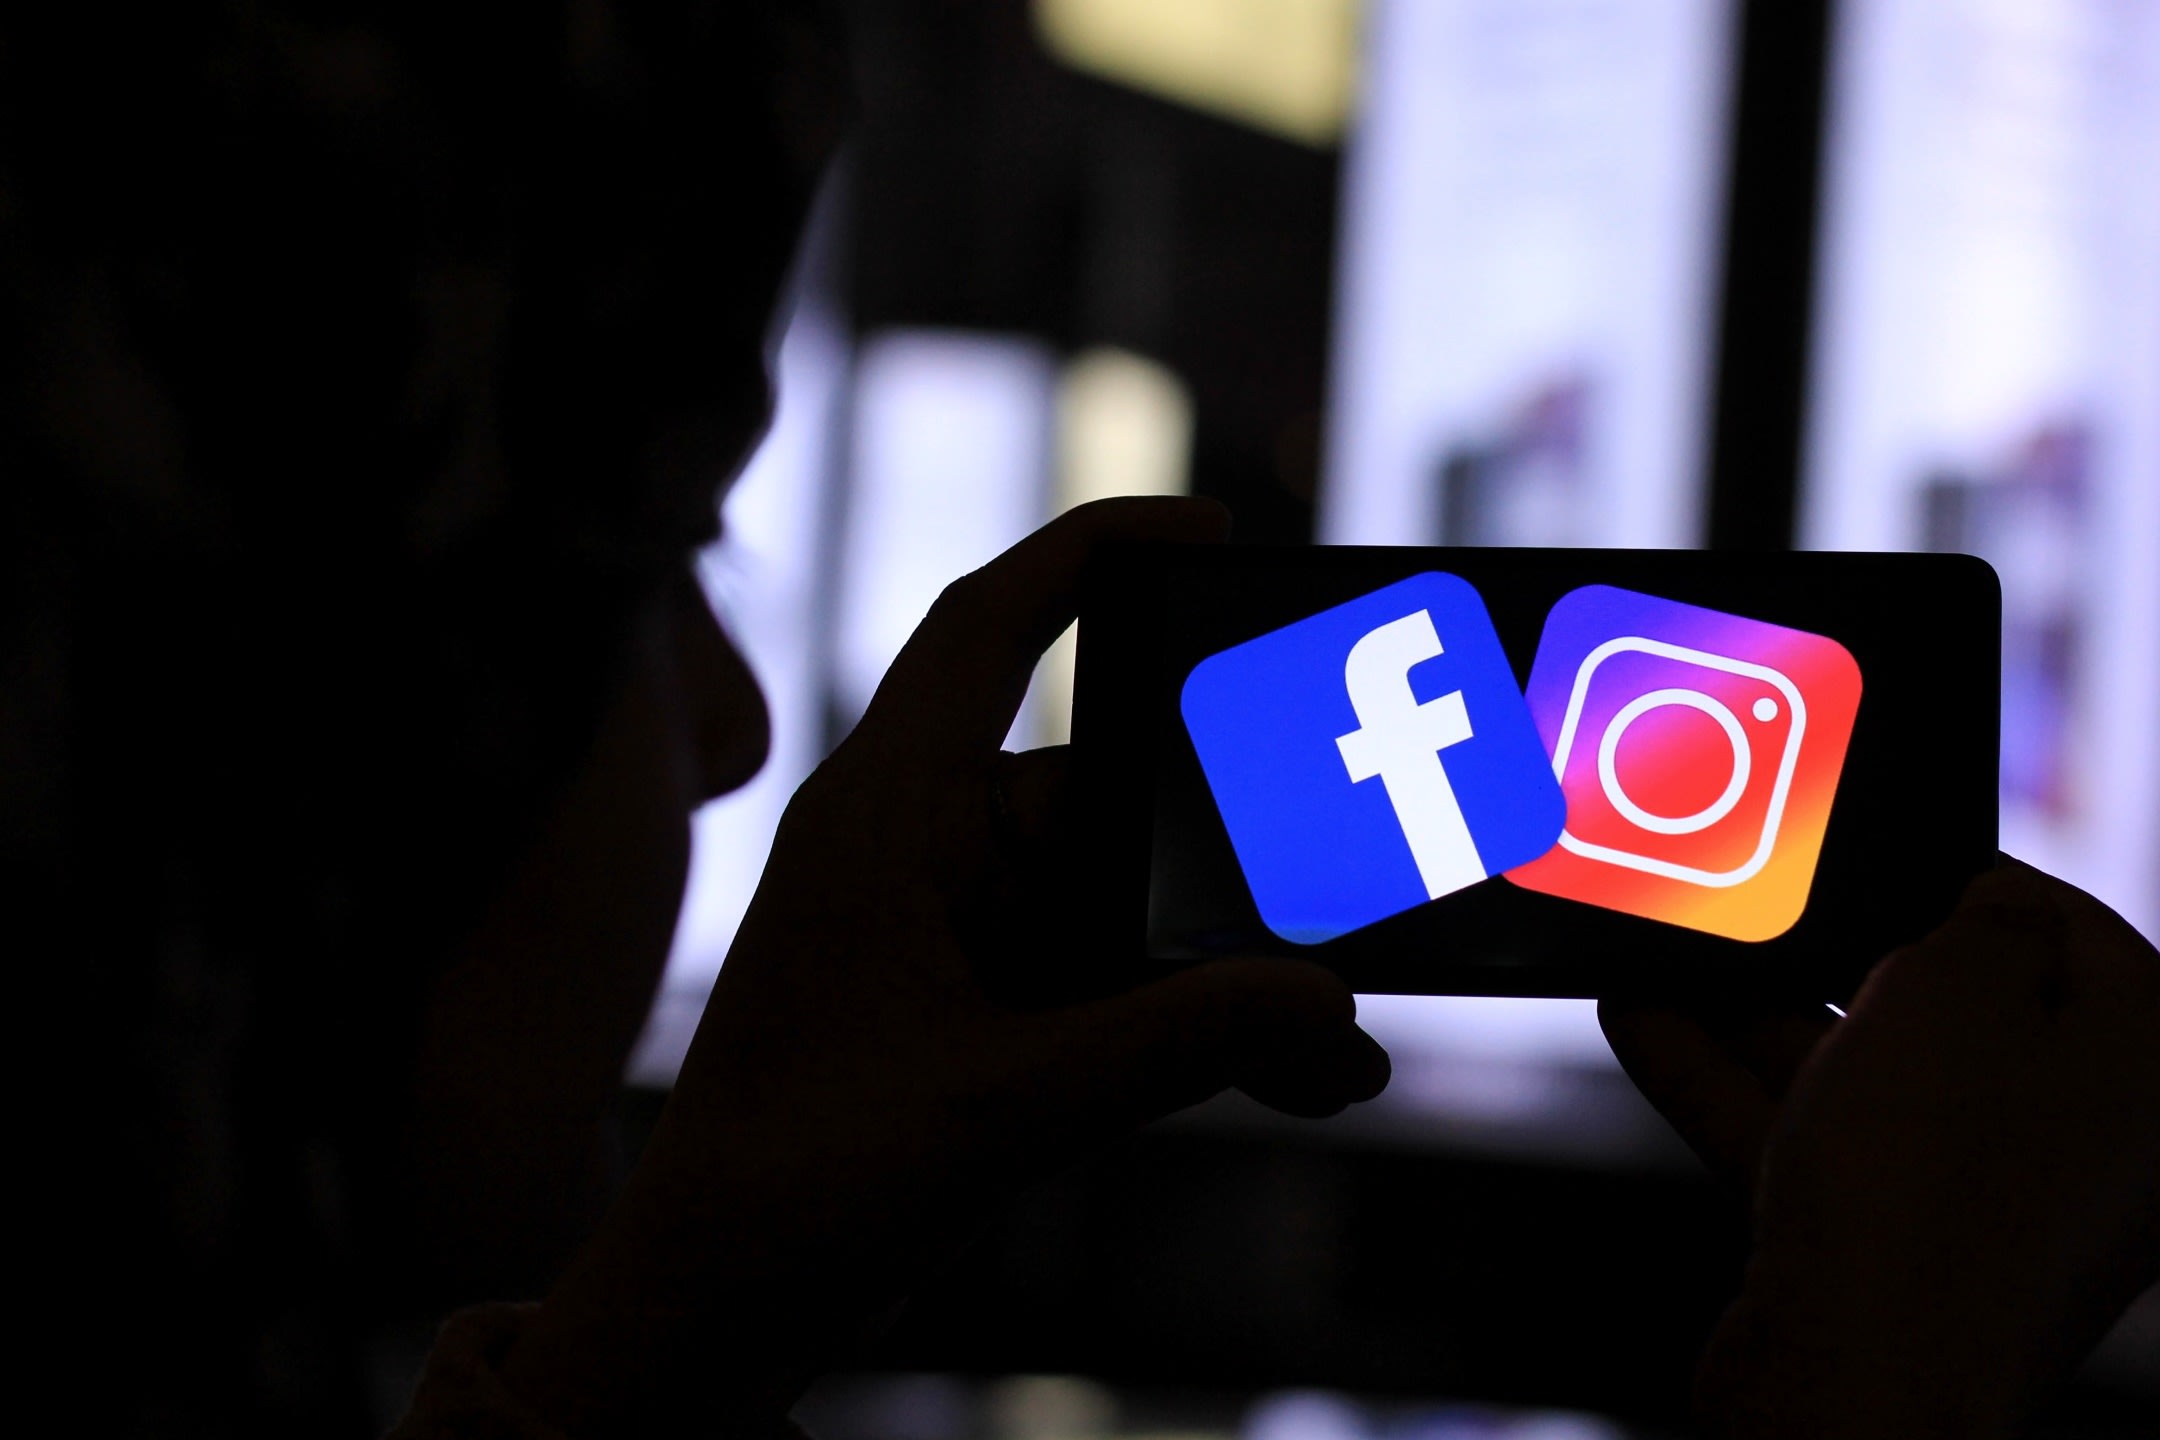 British doctors want a tax on tech giants to fund research on the harms caused by social media